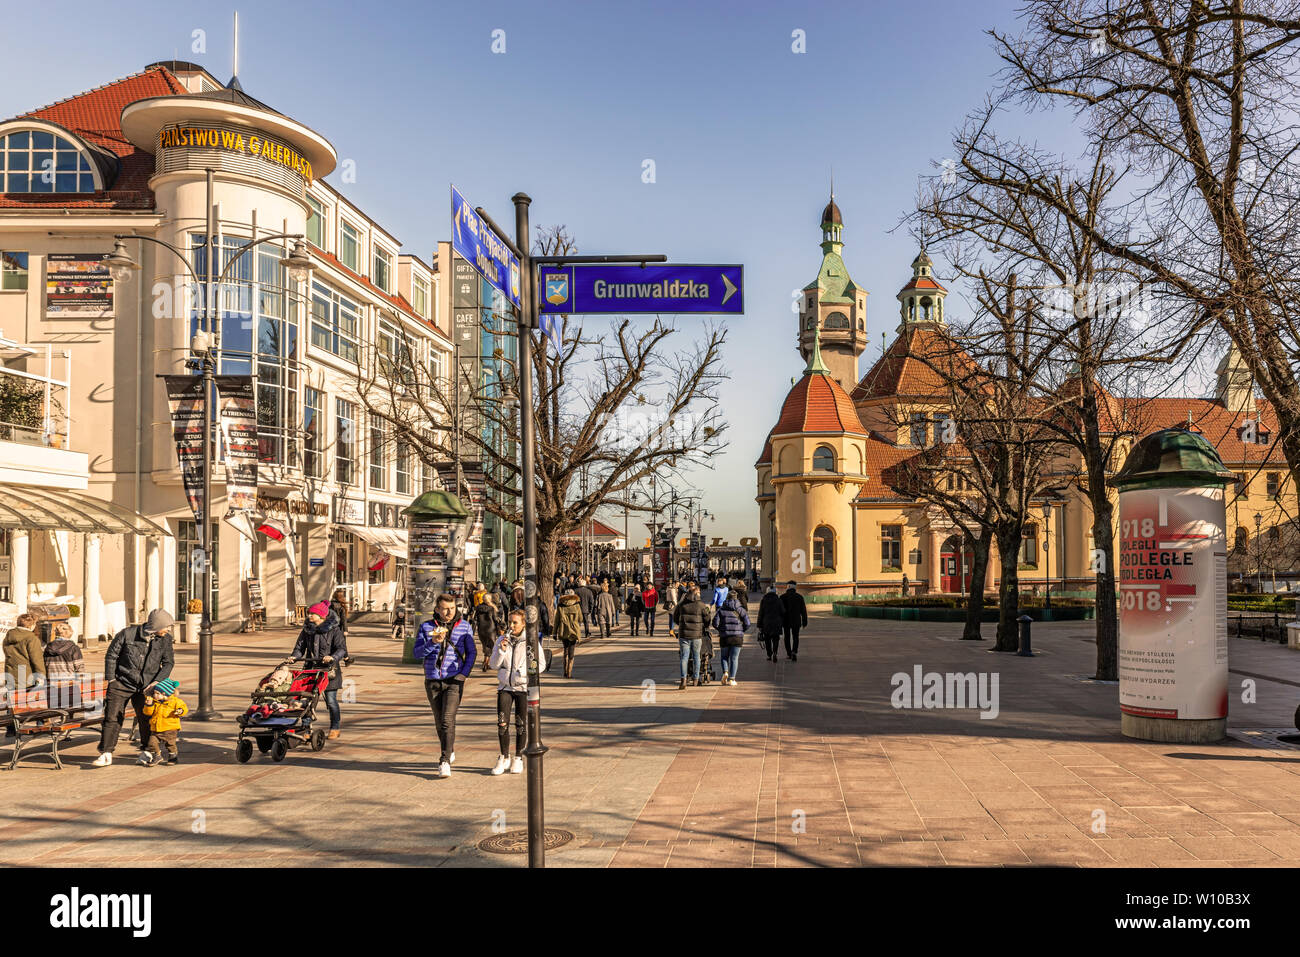 Sopot, Poland - Feb 16, 2019: View at the historical buildings at the entrance to pier called molo in tourist resort town of Sopot, Poland. Stock Photo